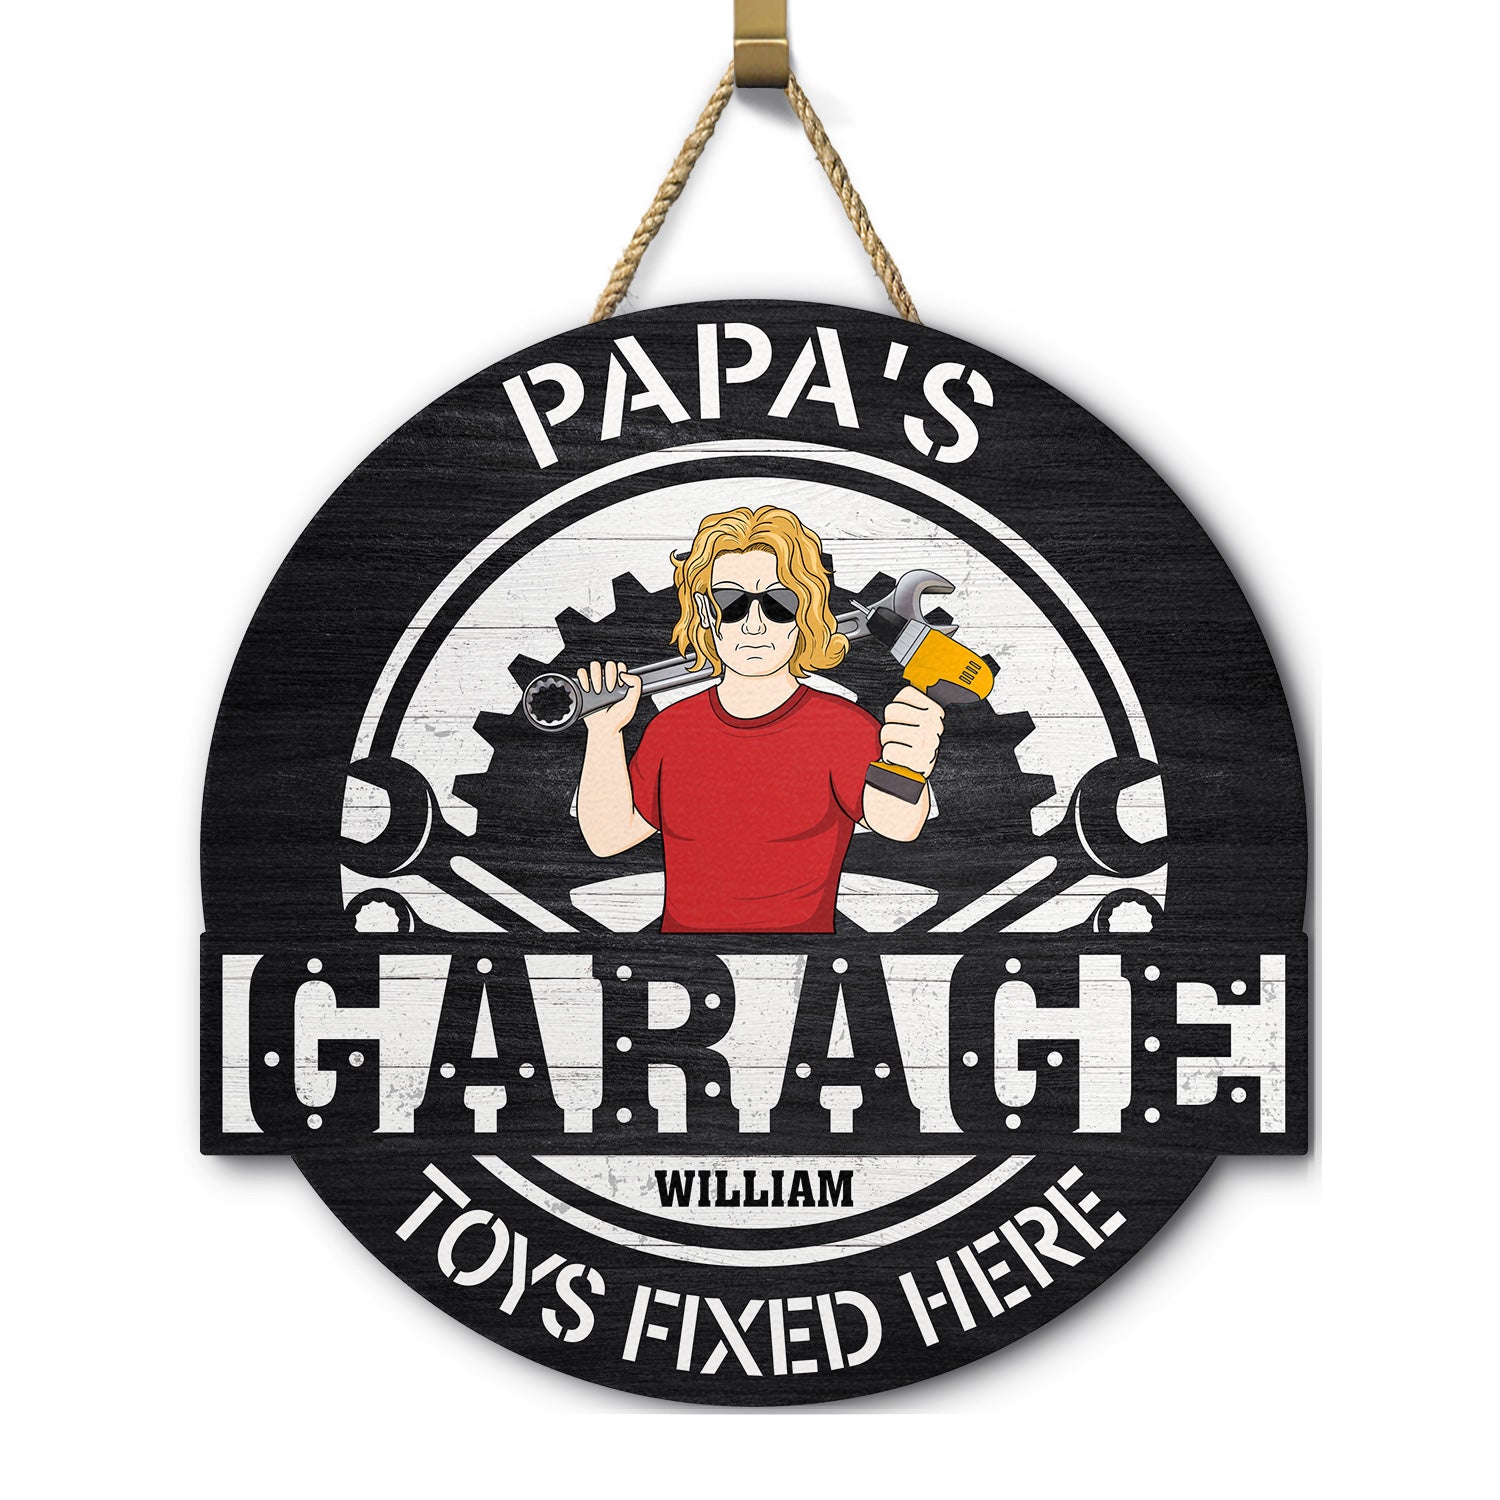 Dad's Papa's Garage - Gift For Father, Grandpa, Grandfather - Personalized Custom Shaped Wood Sign